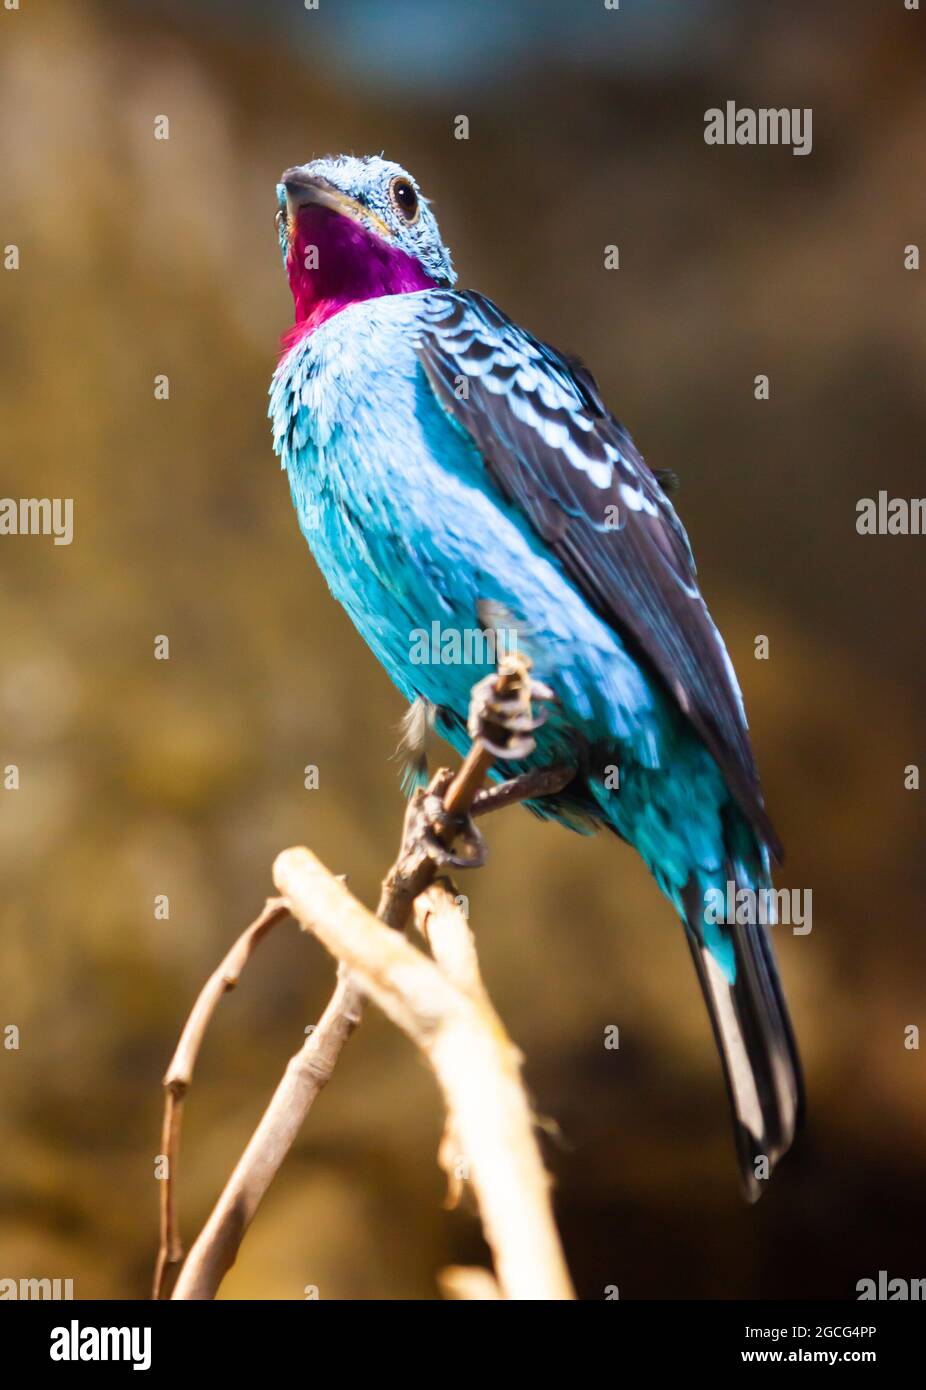 Spangled Cotinga with red and blue feathers Stock Photo